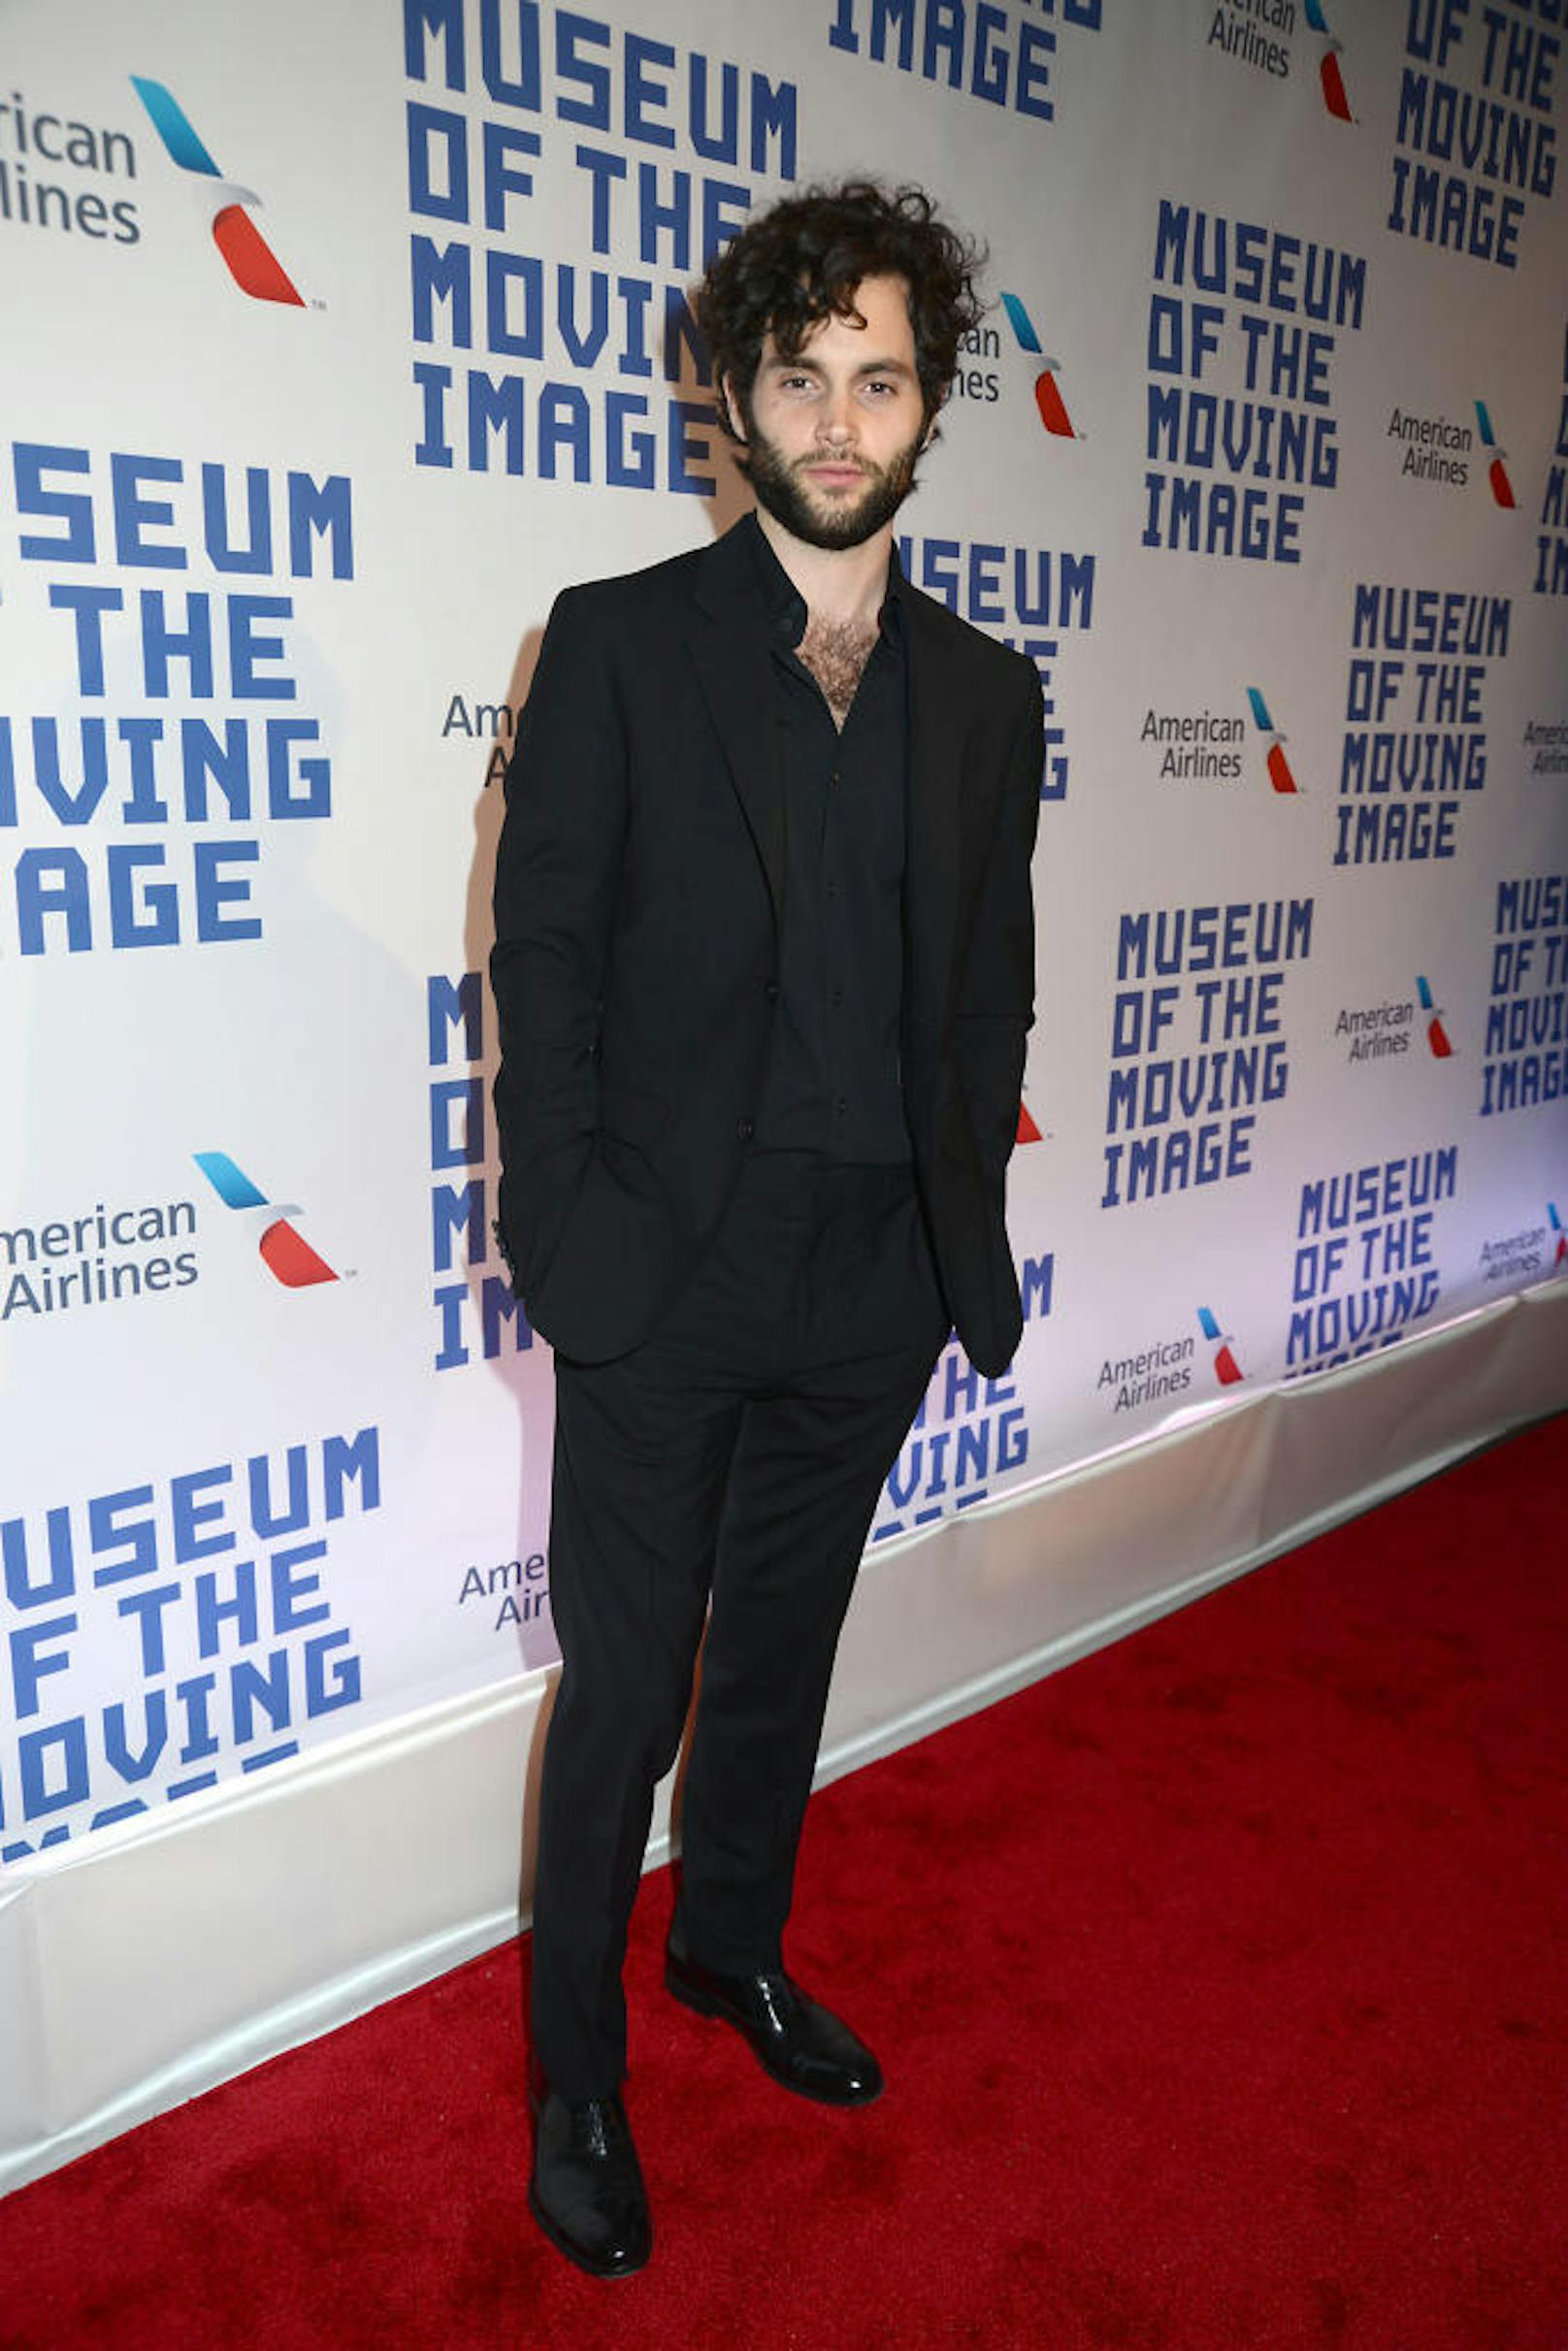 Penn Badgley beim "Museum of the Moving Image Tribute to Kevin Spacey" im April 2014 in New York City.